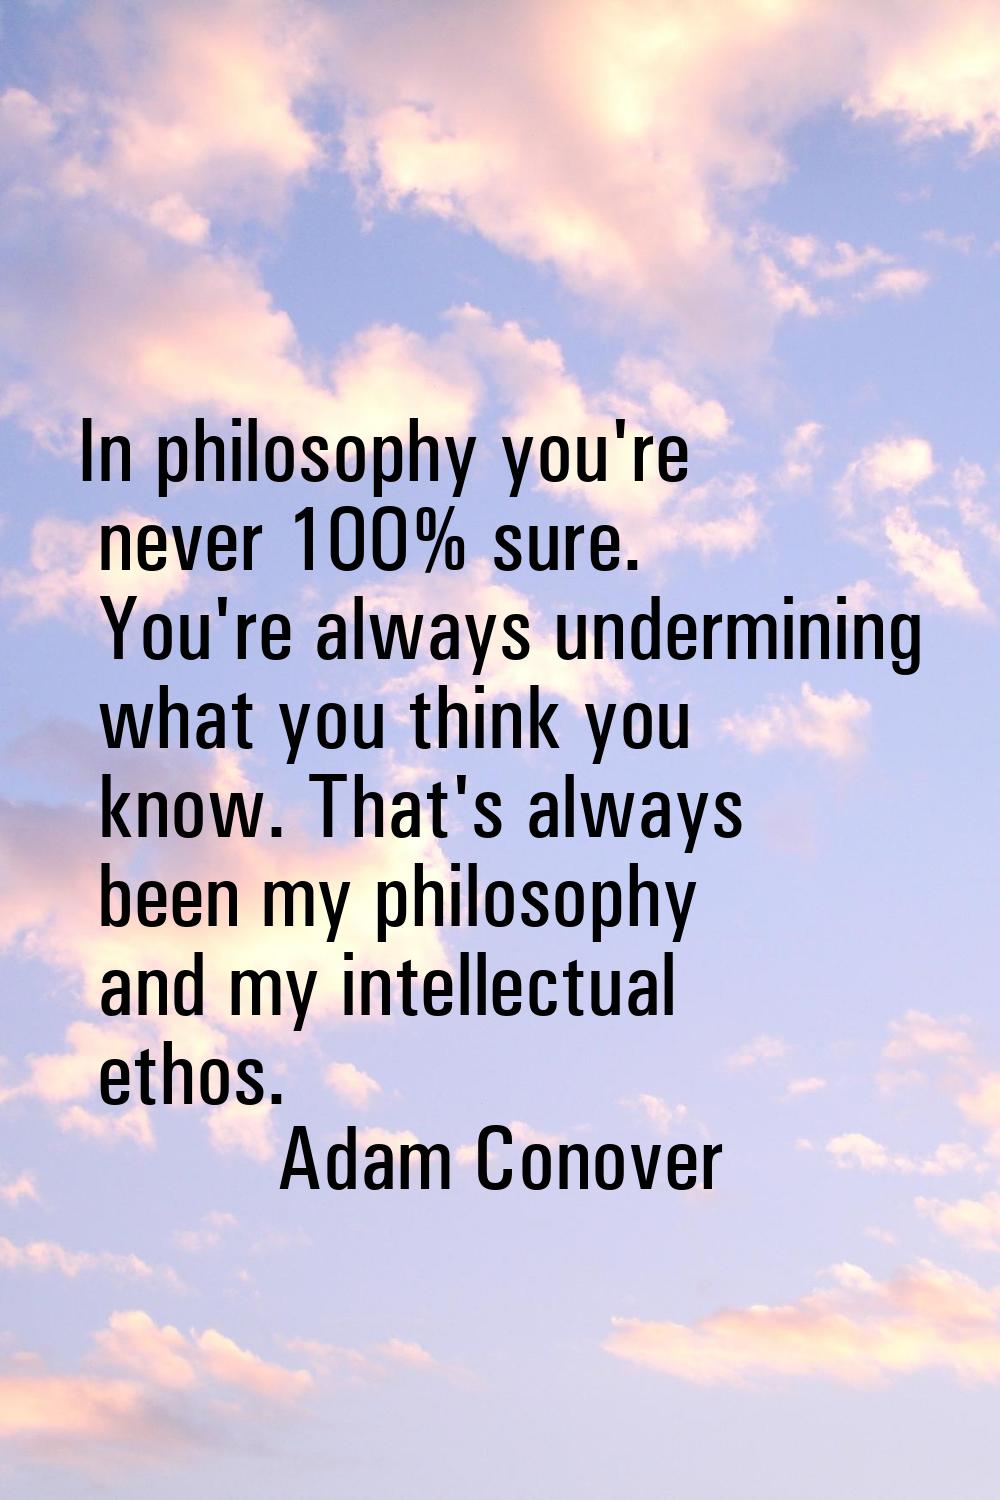 In philosophy you're never 100% sure. You're always undermining what you think you know. That's alw